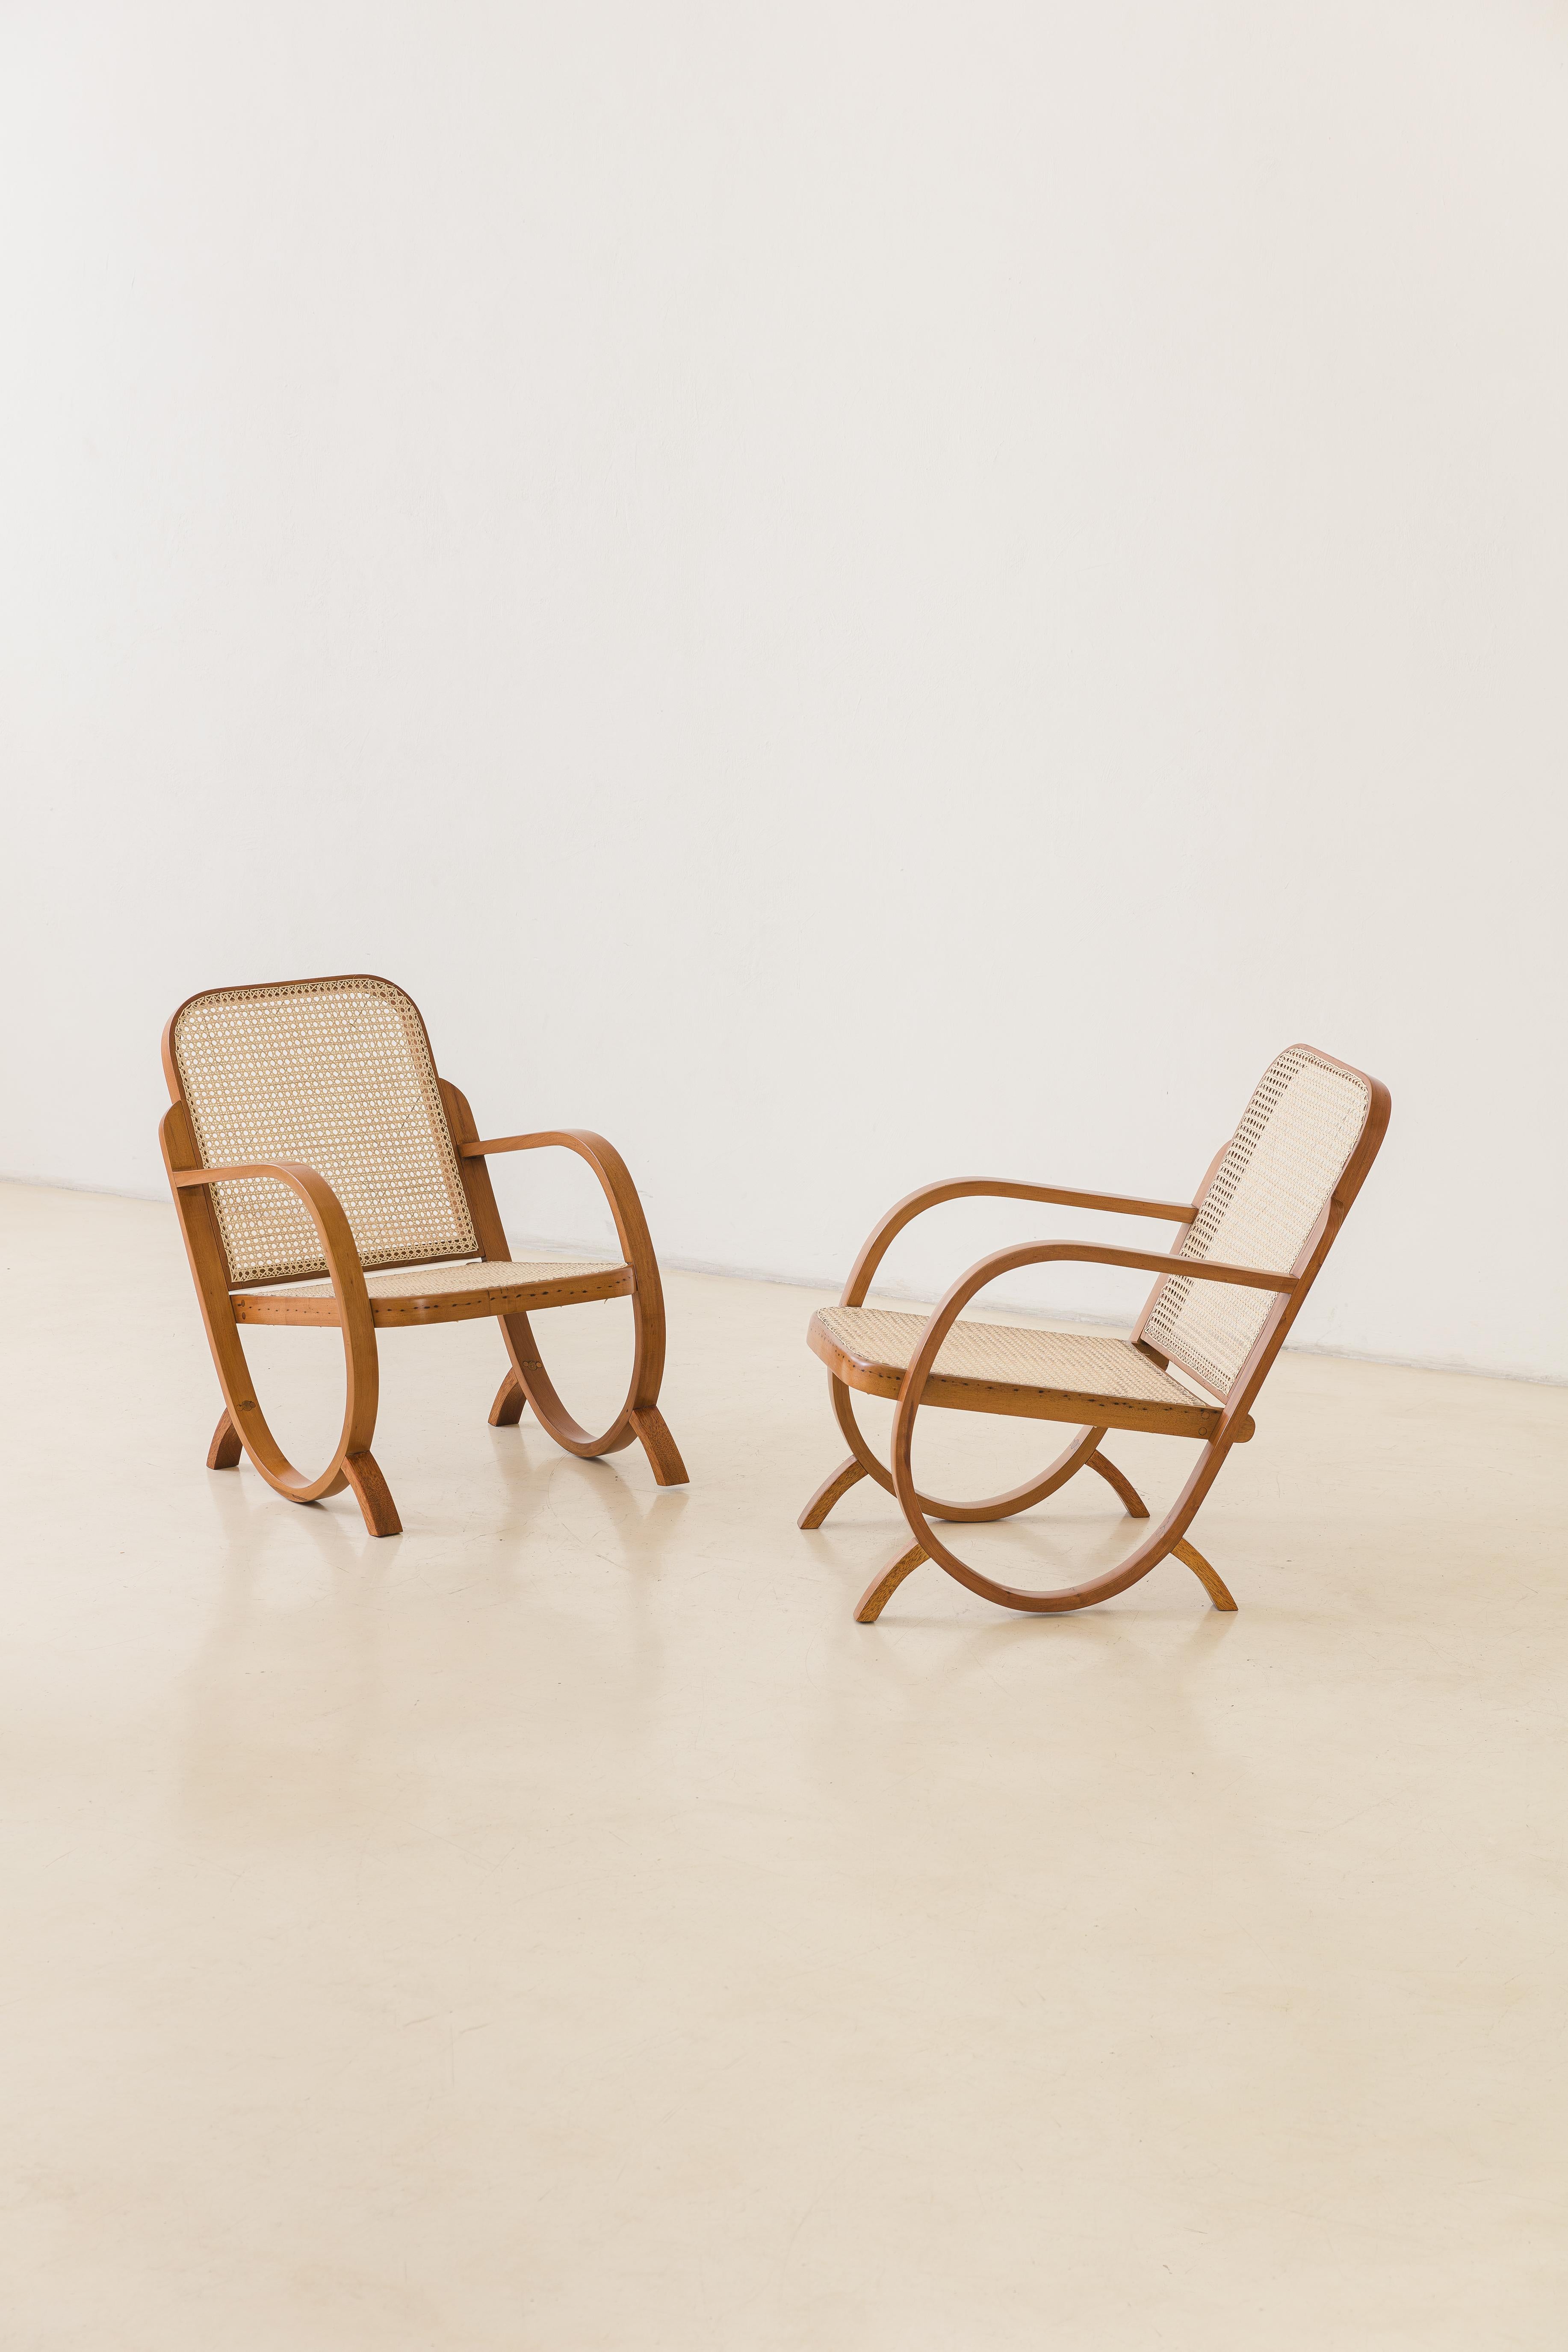 Brazilian Pair of Armchairs by Moveis Gerdau, Bentwood and Cane, 1930 For Sale